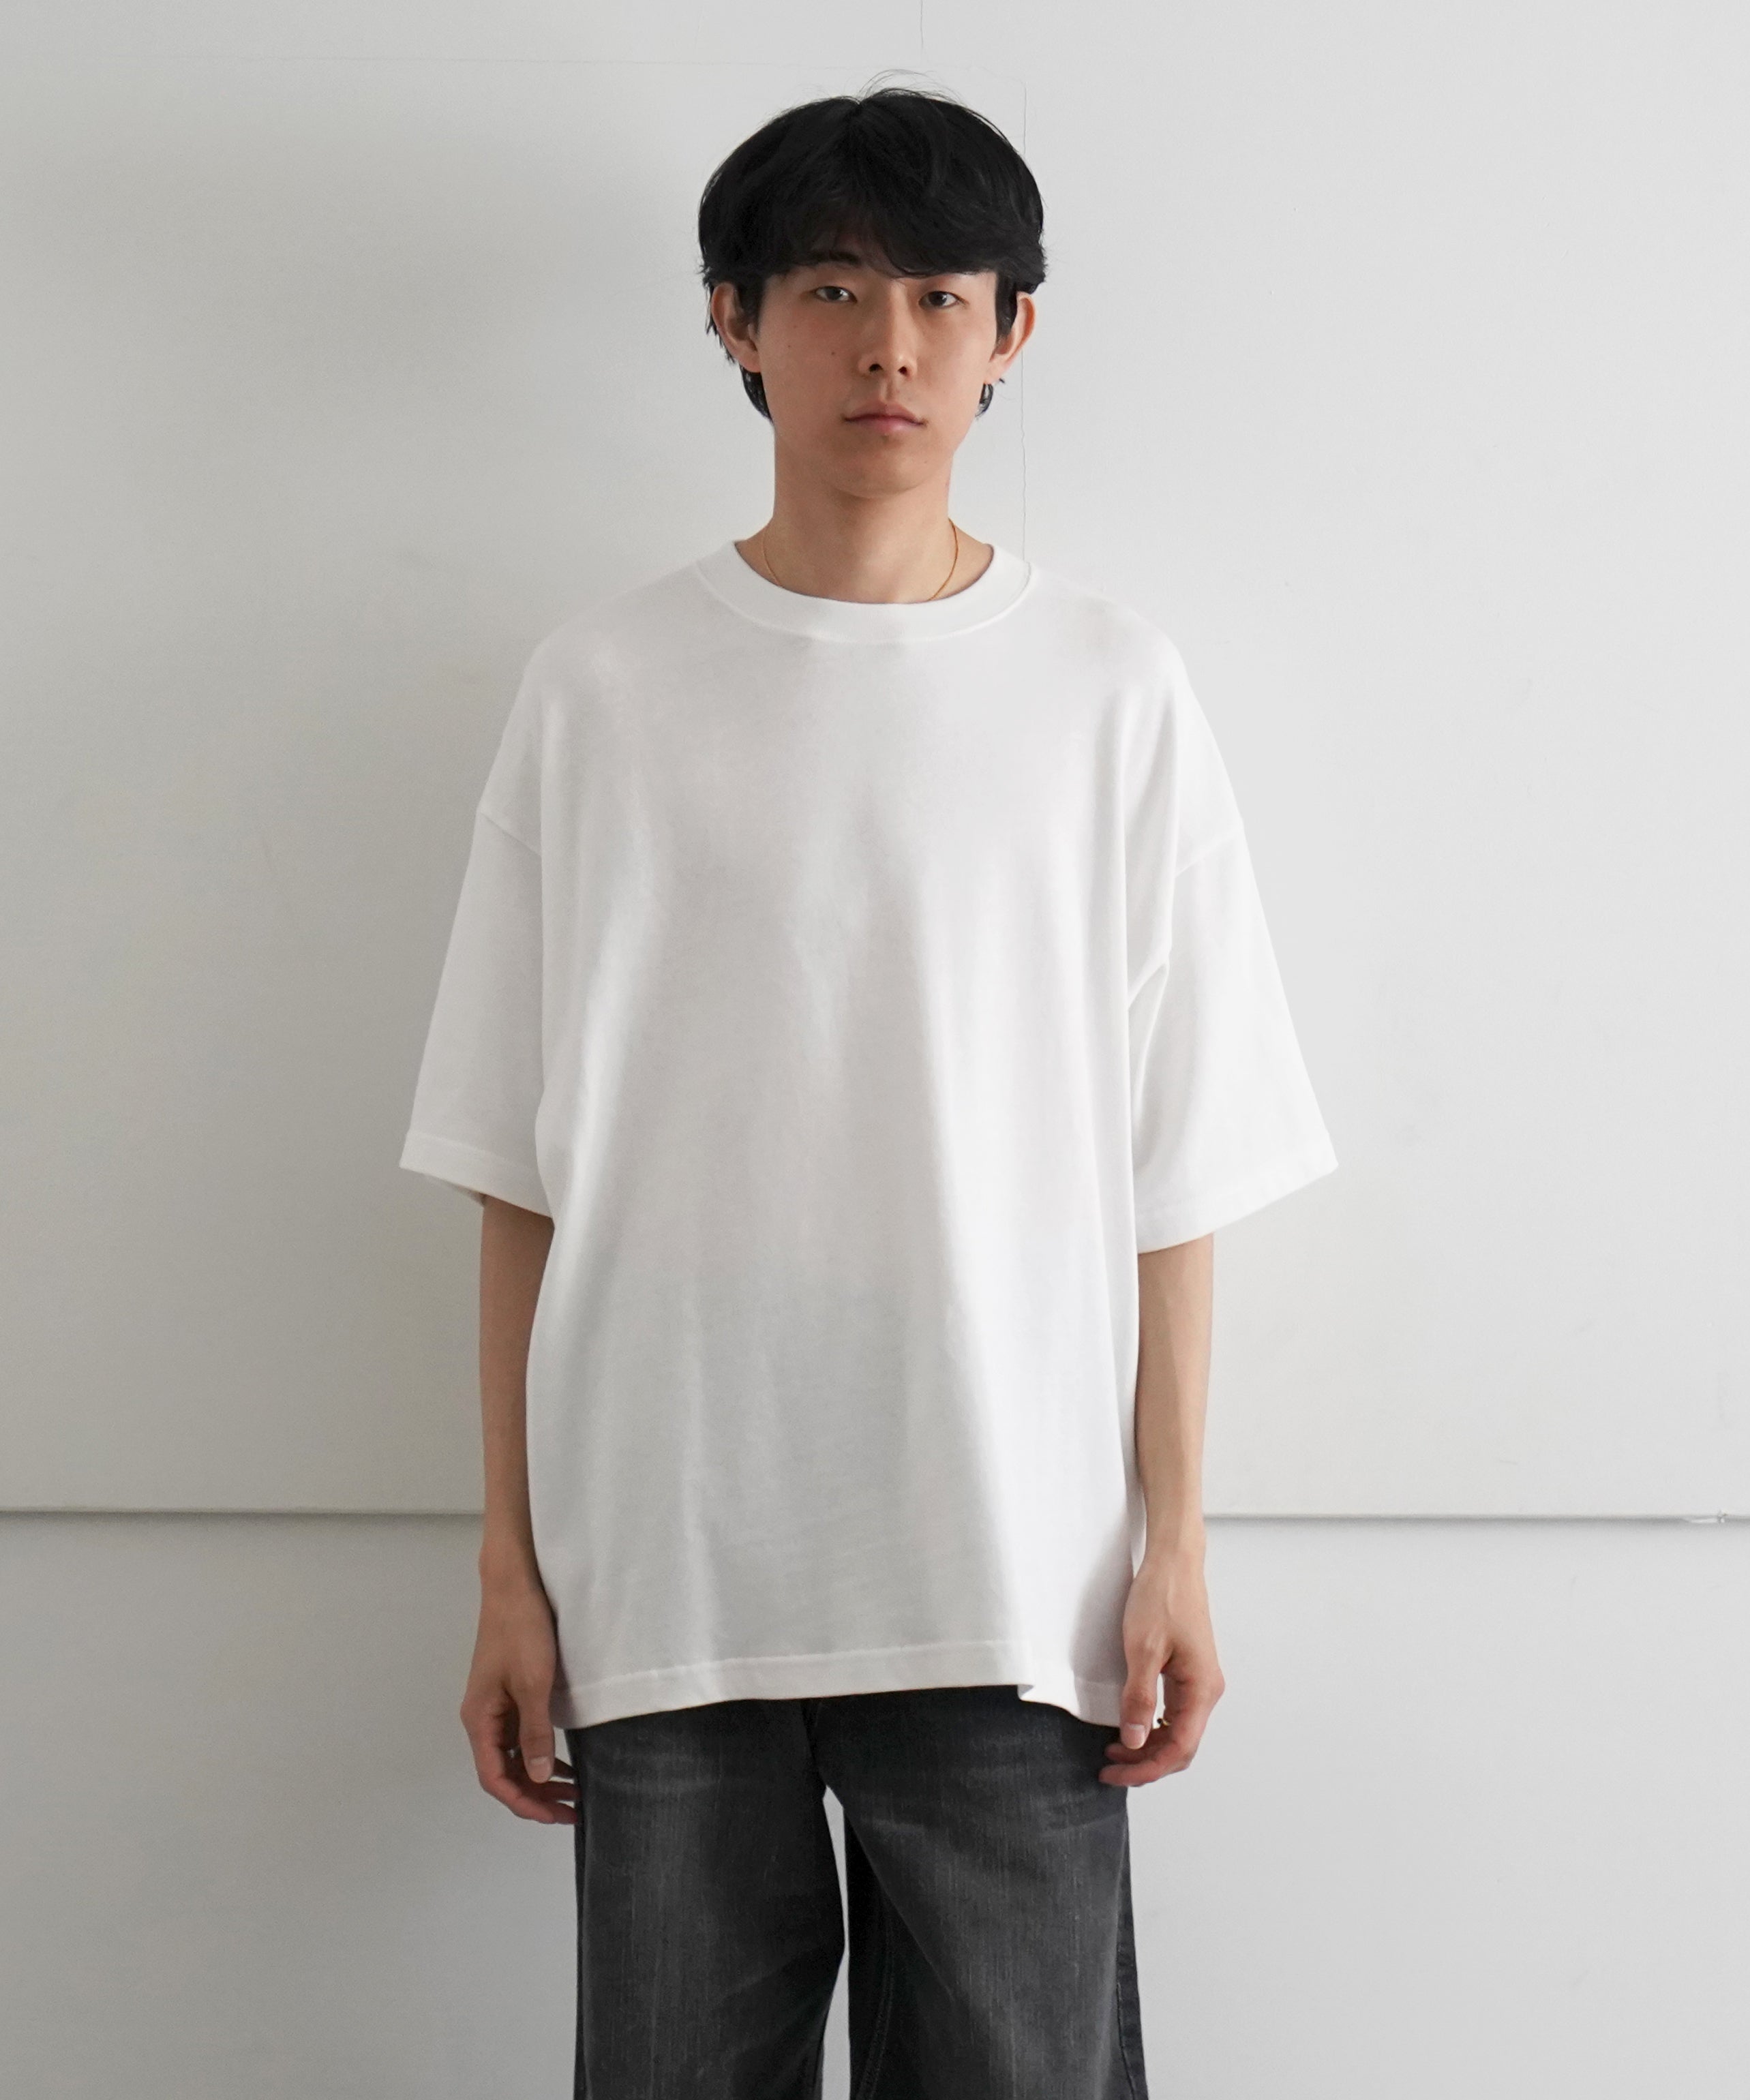 EVCON WIDE S/S T-SHIRT "GRAY"